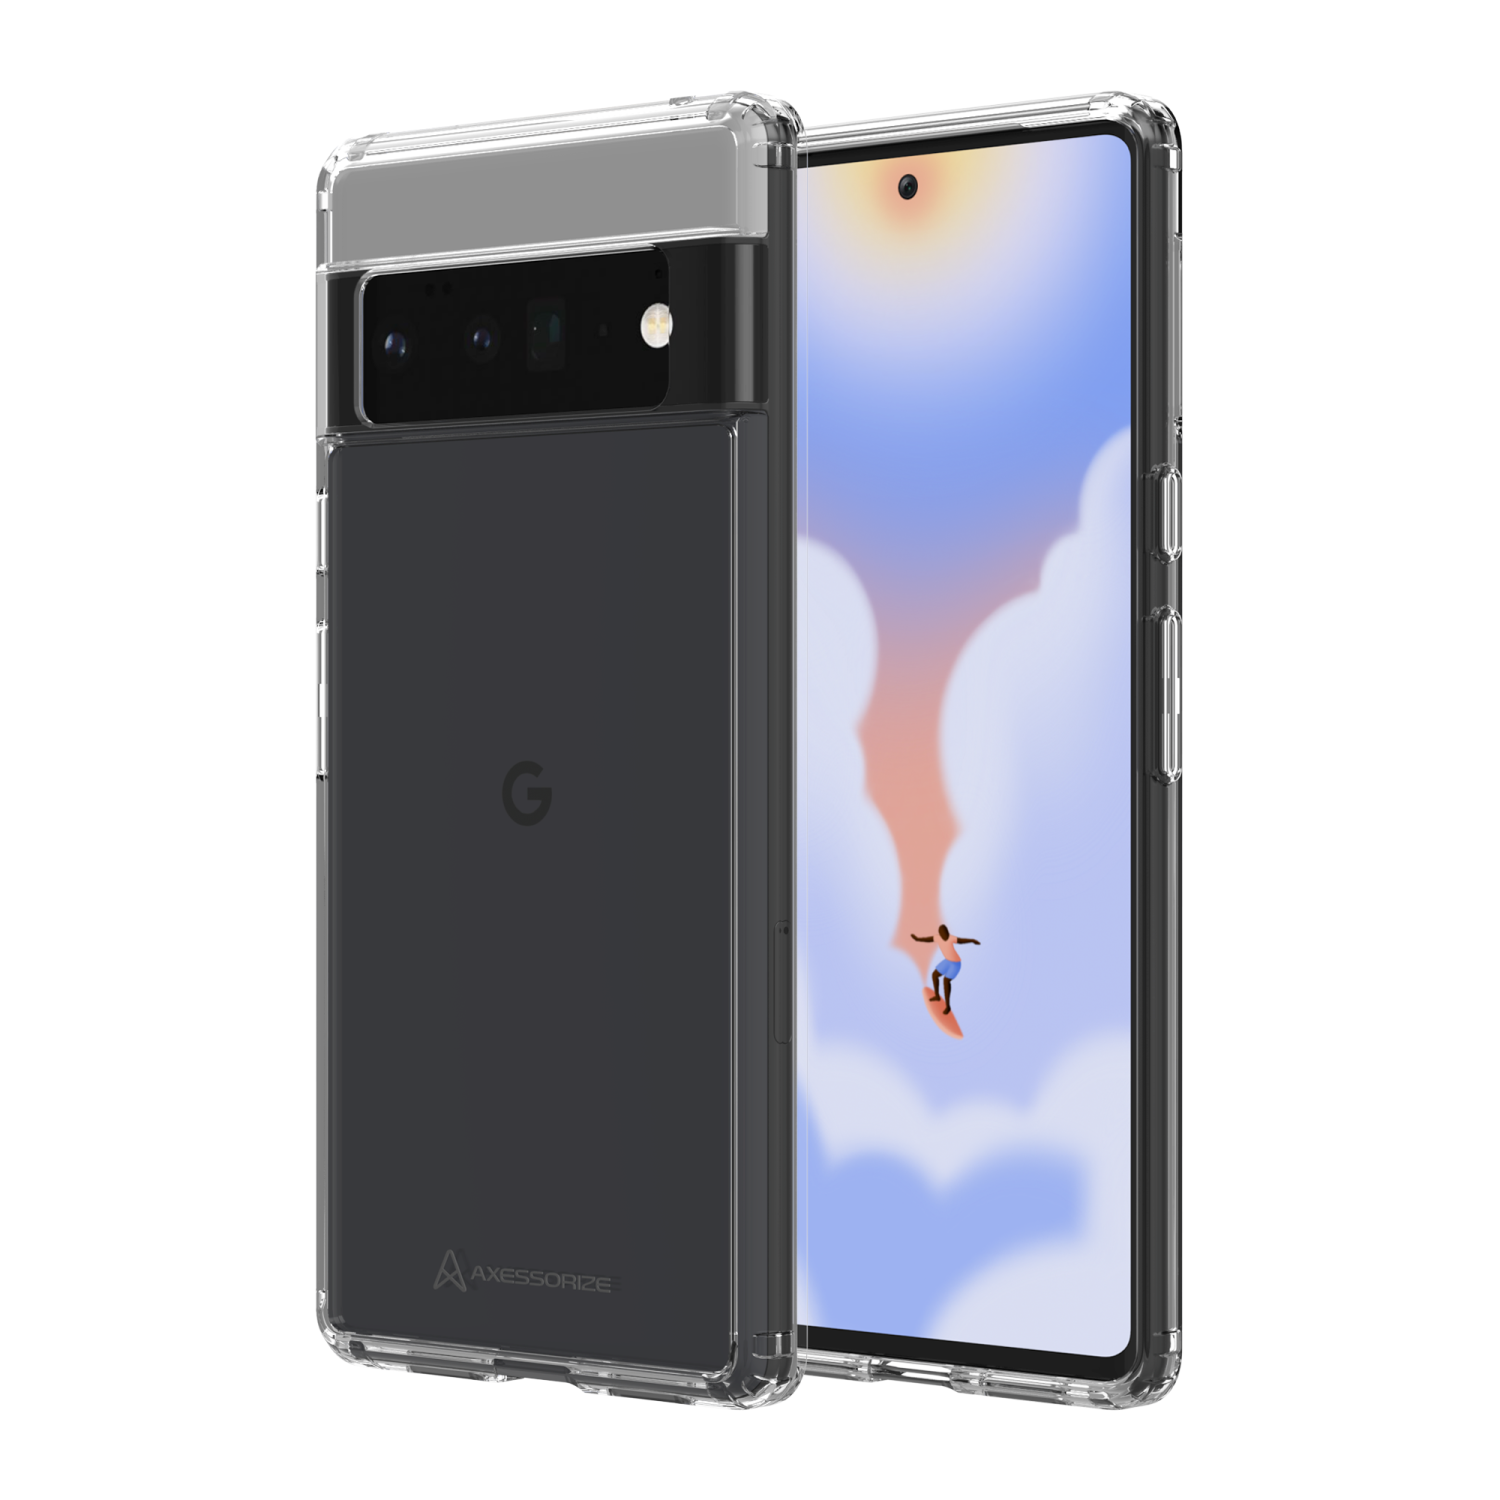 Axessorize ULTRA CLEAR Drop-tested Clear Case for Google Pixel 6 Pro